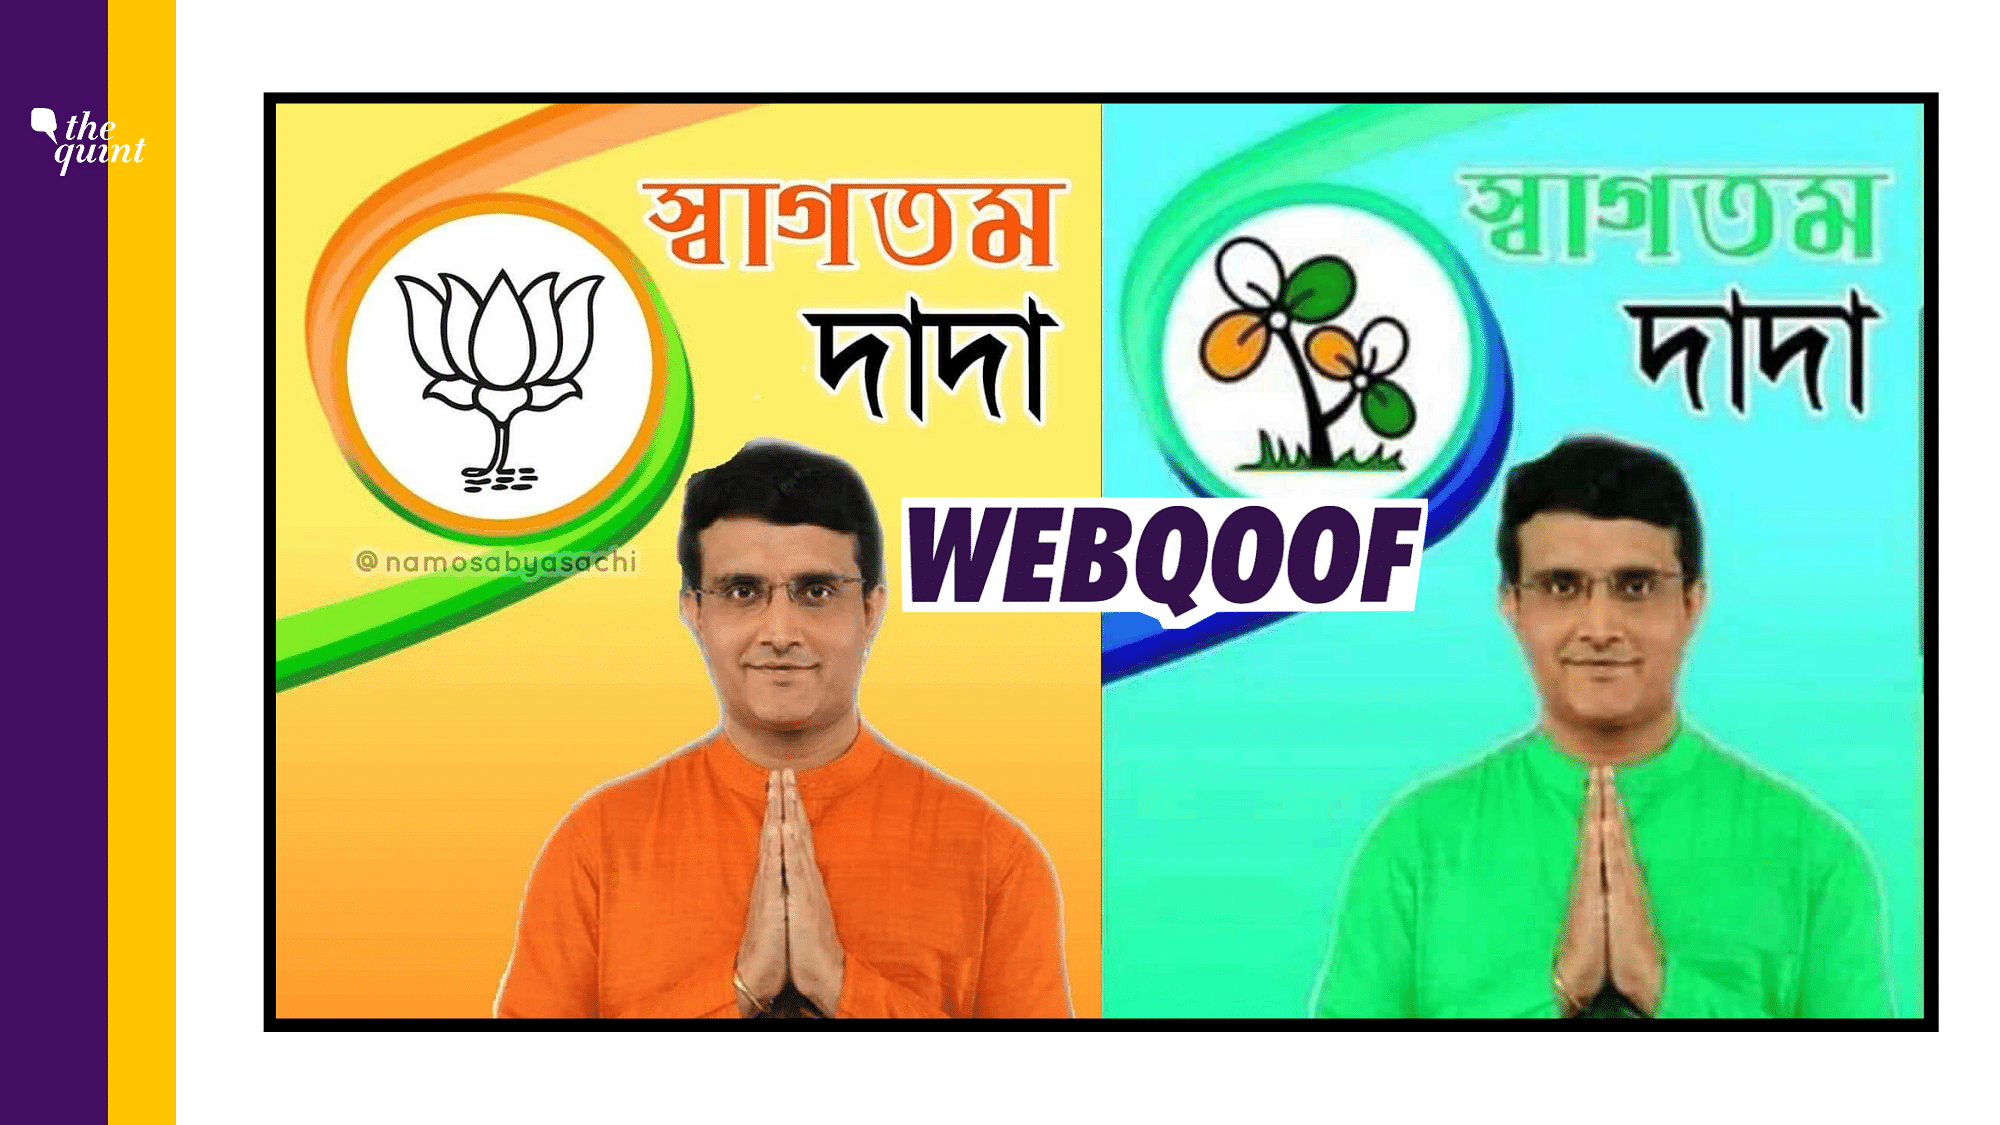 An image of Sourav Ganguly has been morphed to make fake political party posters.